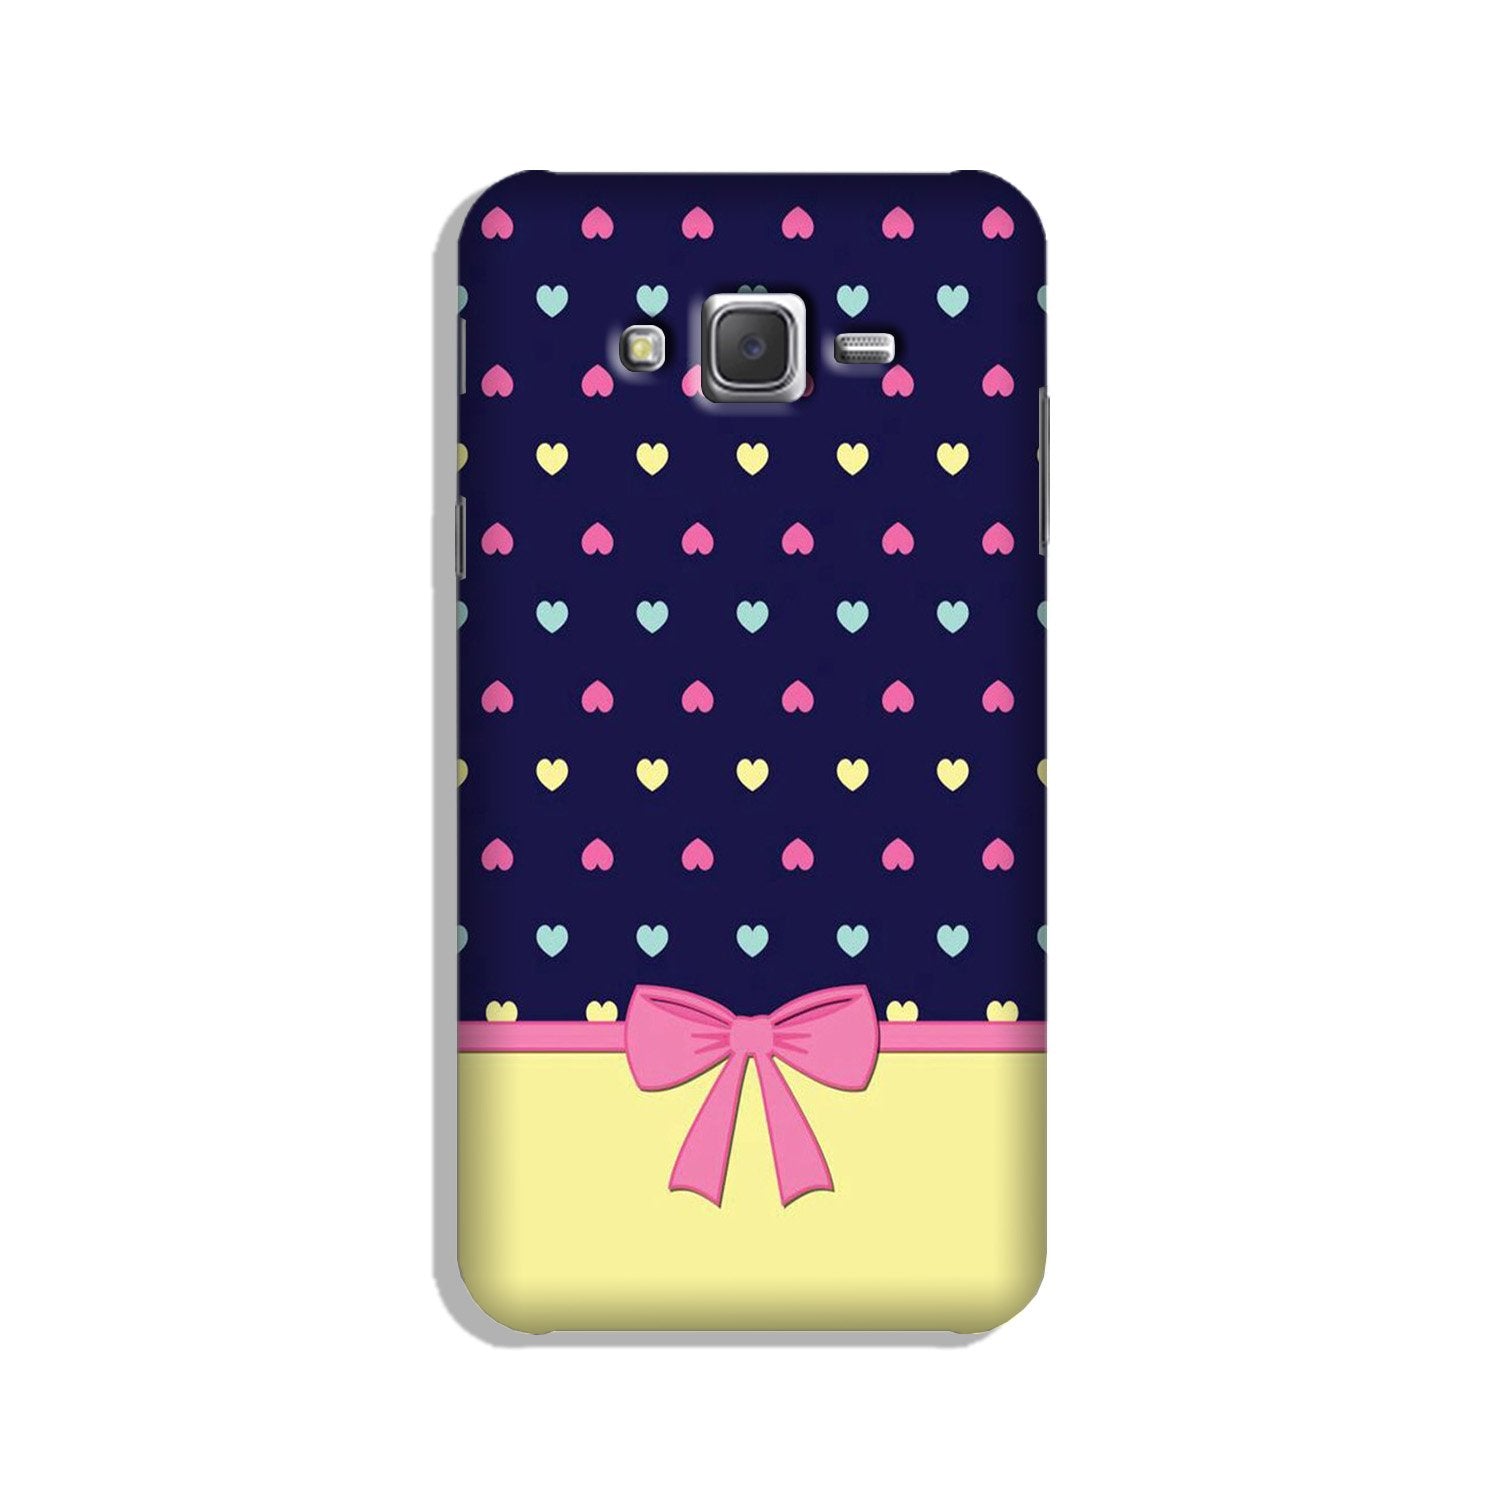 Gift Wrap5 Case for Galaxy J3 (2015)